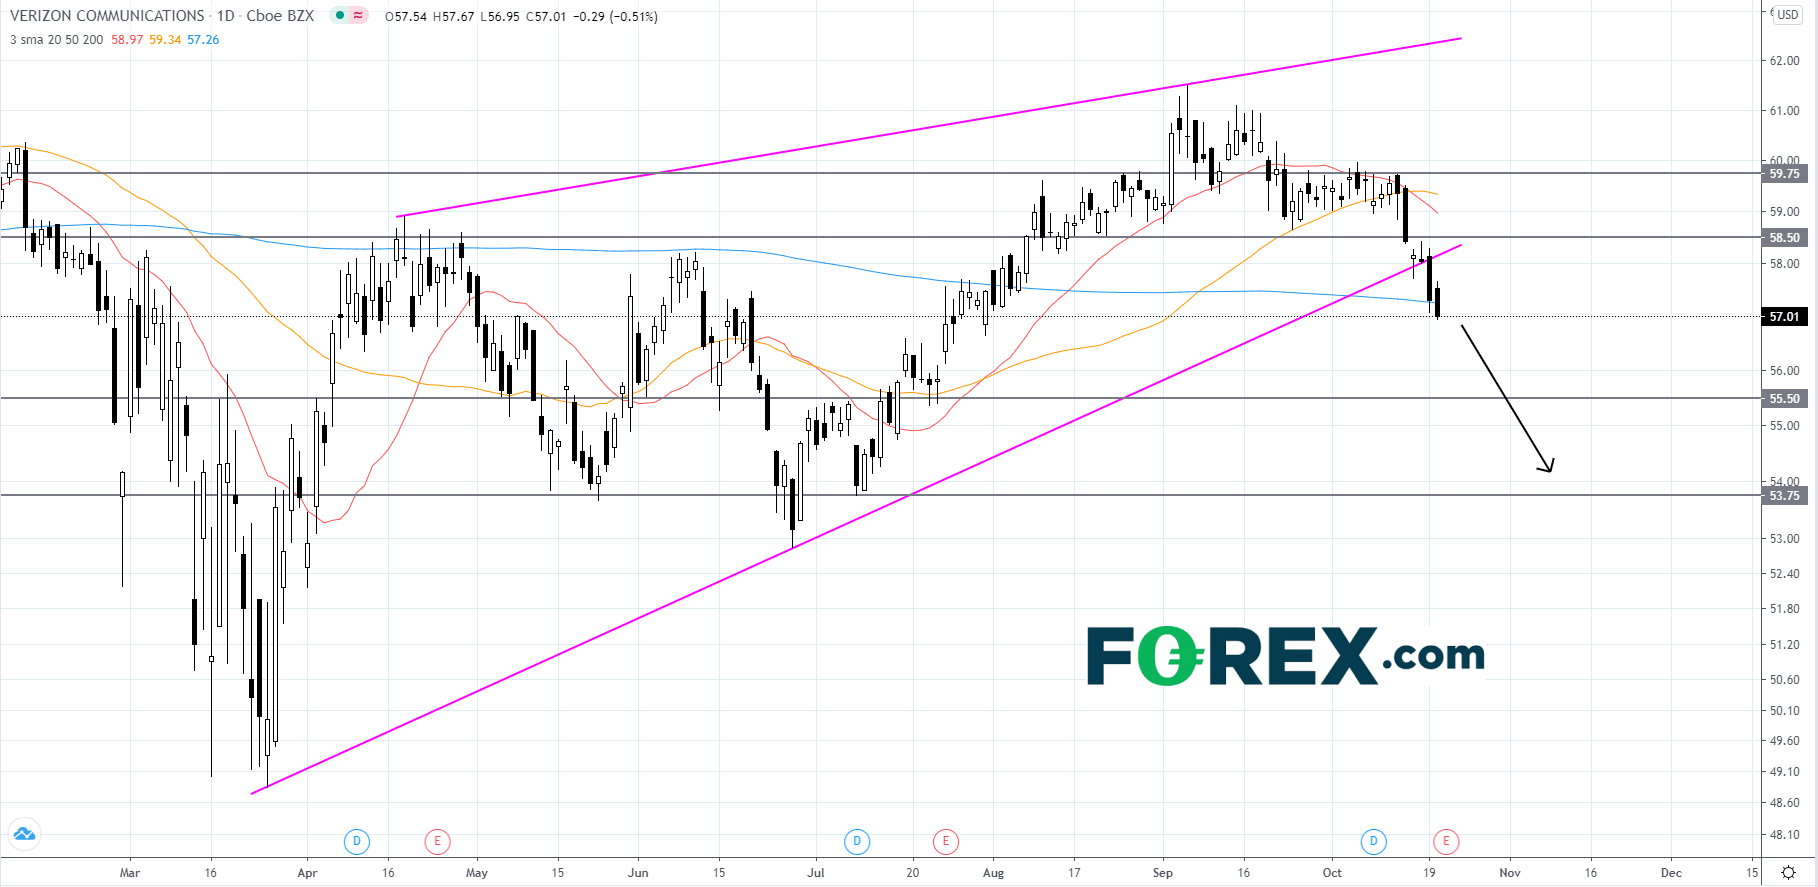 Chart analysis of Verizon Communications performance. Published in October 2020 by FOREX.com